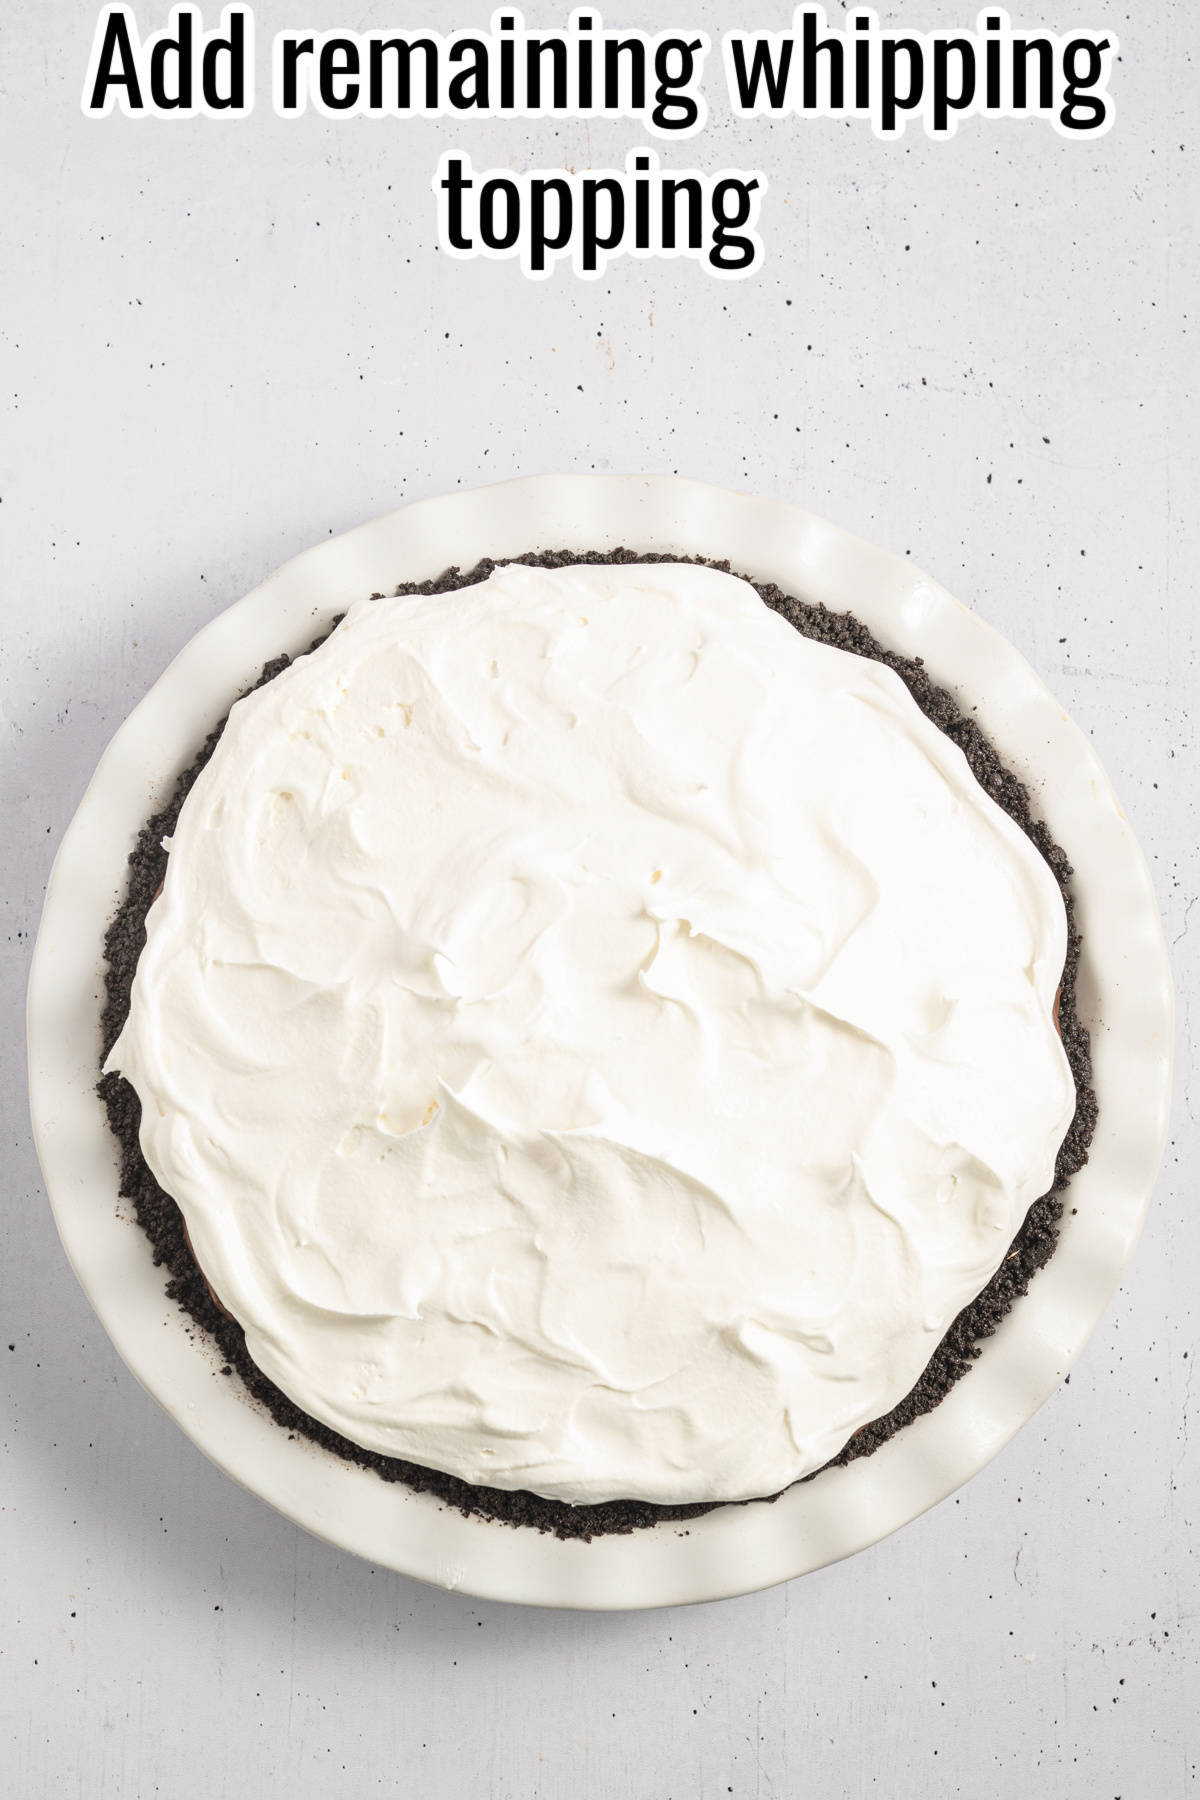 cool whip added to the top of a chocolate pie.